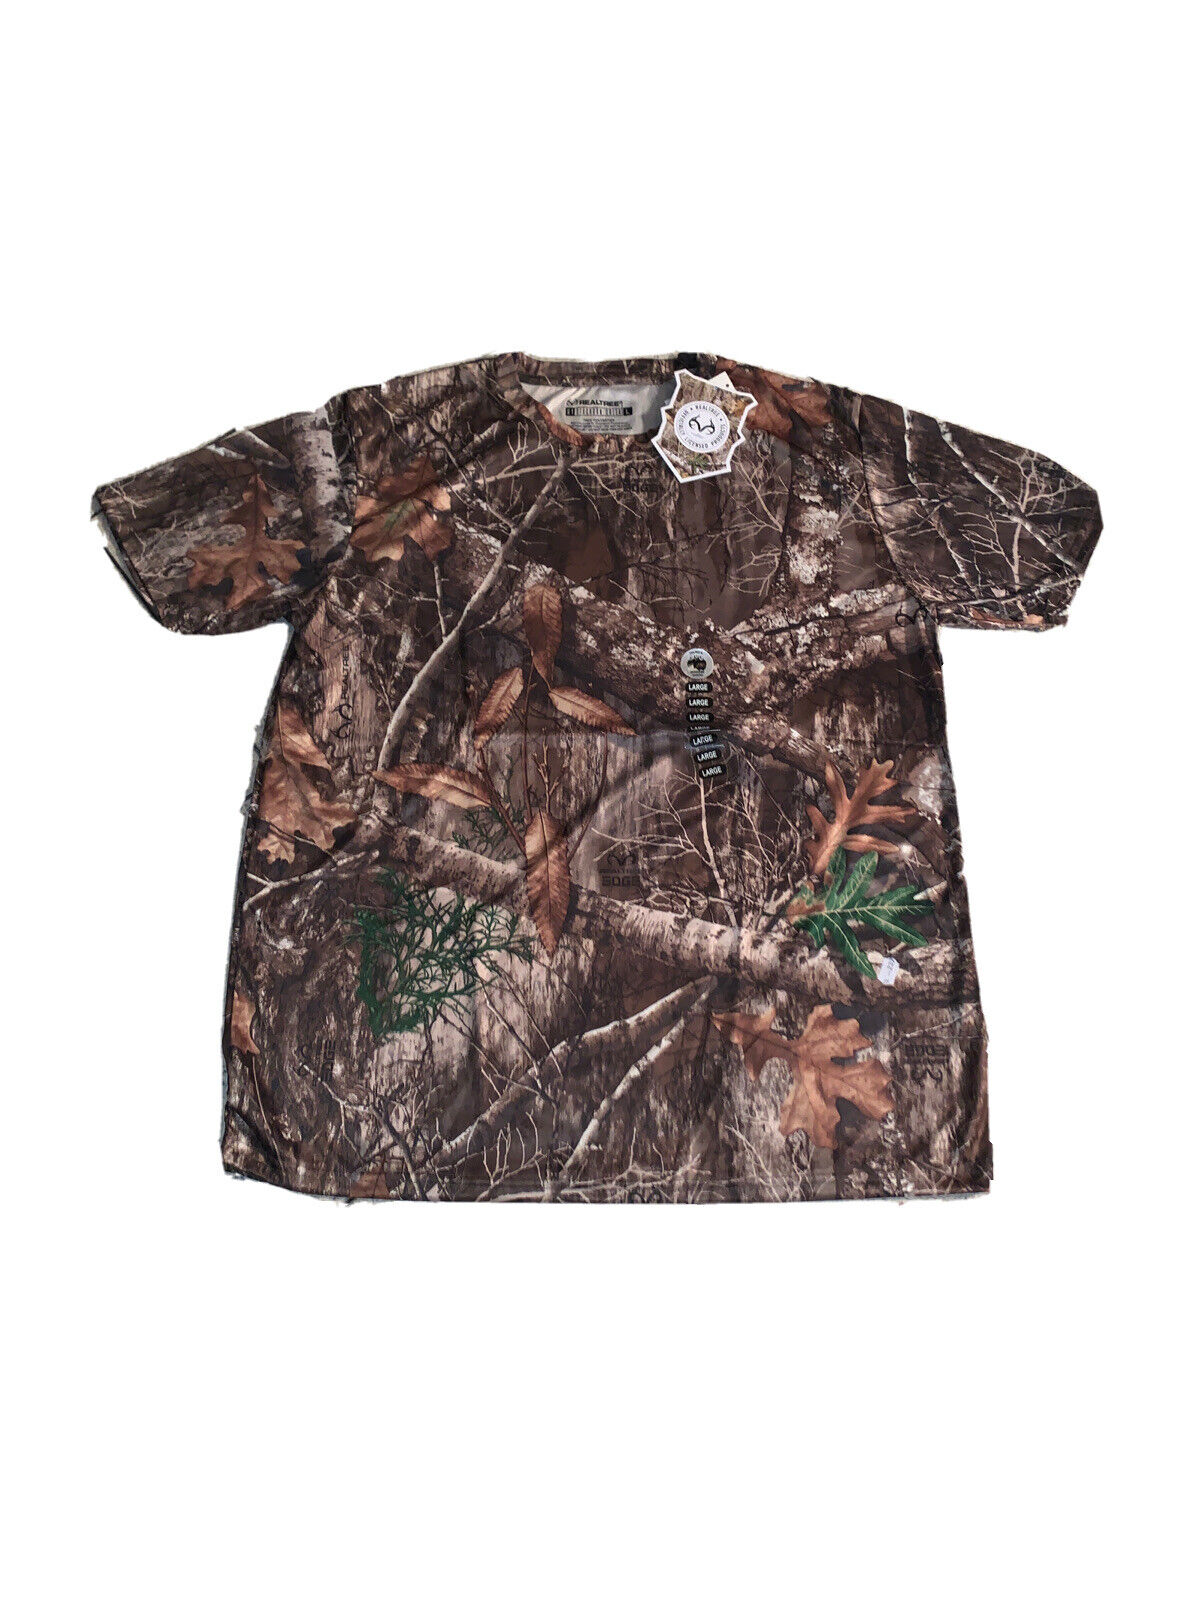 XL Real Tree Edge 100% Polyester Camouflage Short Sleeve Shirt (RT3)